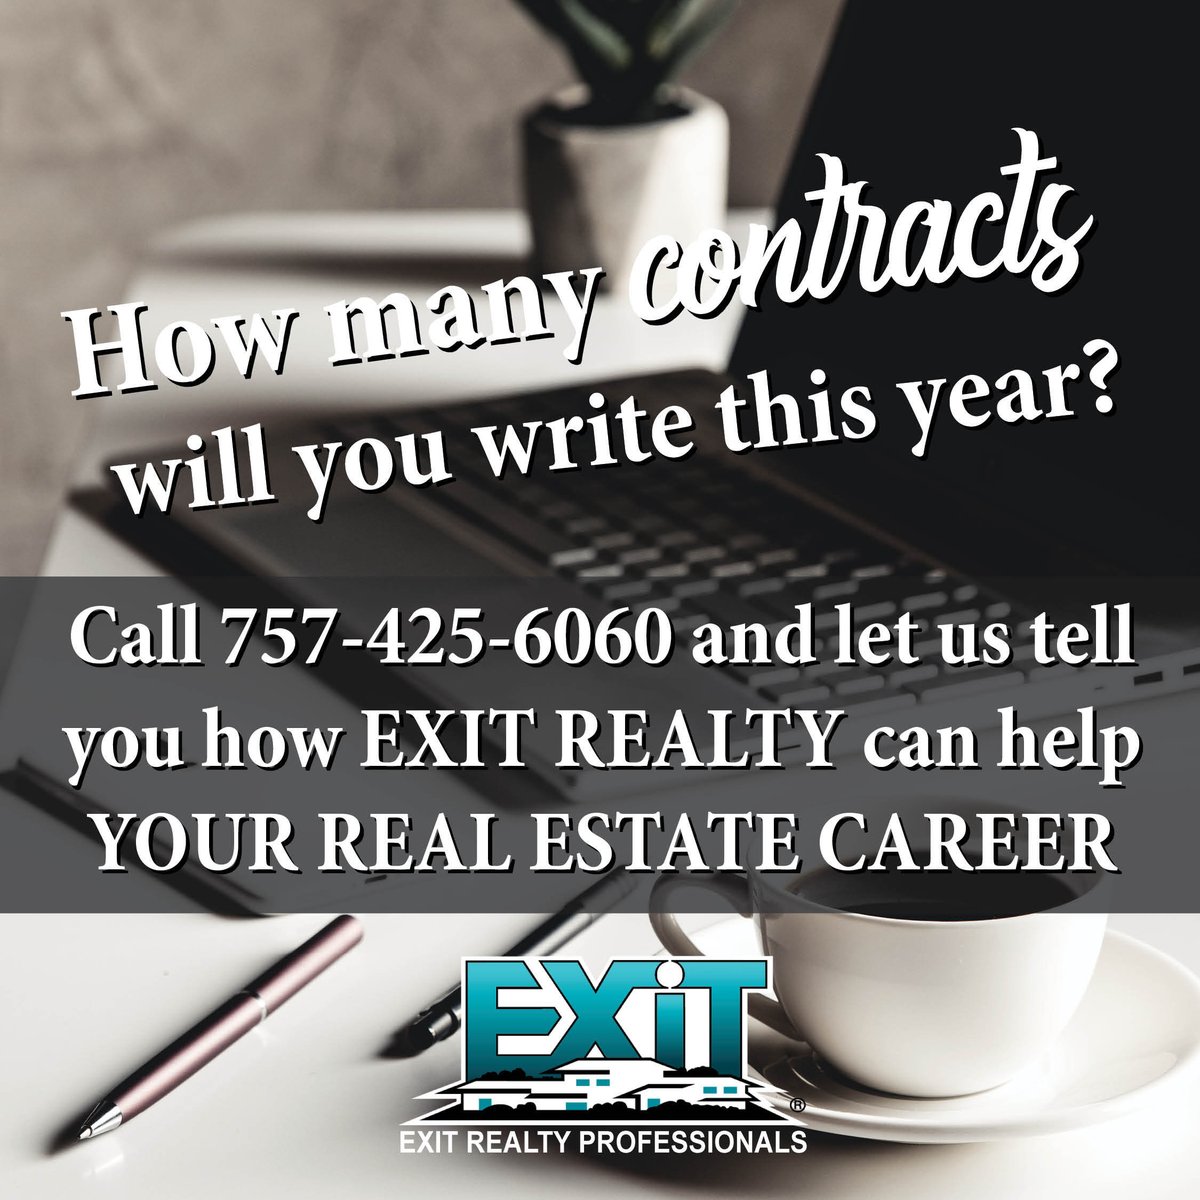 Are you on track with your real estate business goals for this year?
Call us today and find out how EXIT can help you to success!

#VirginiaBeachRealEstate #EXITrealty #coastalhome #RealEstate #VirginiaBeach #homesforsale #hamptonroads #propertysolutions #propertymanagement...